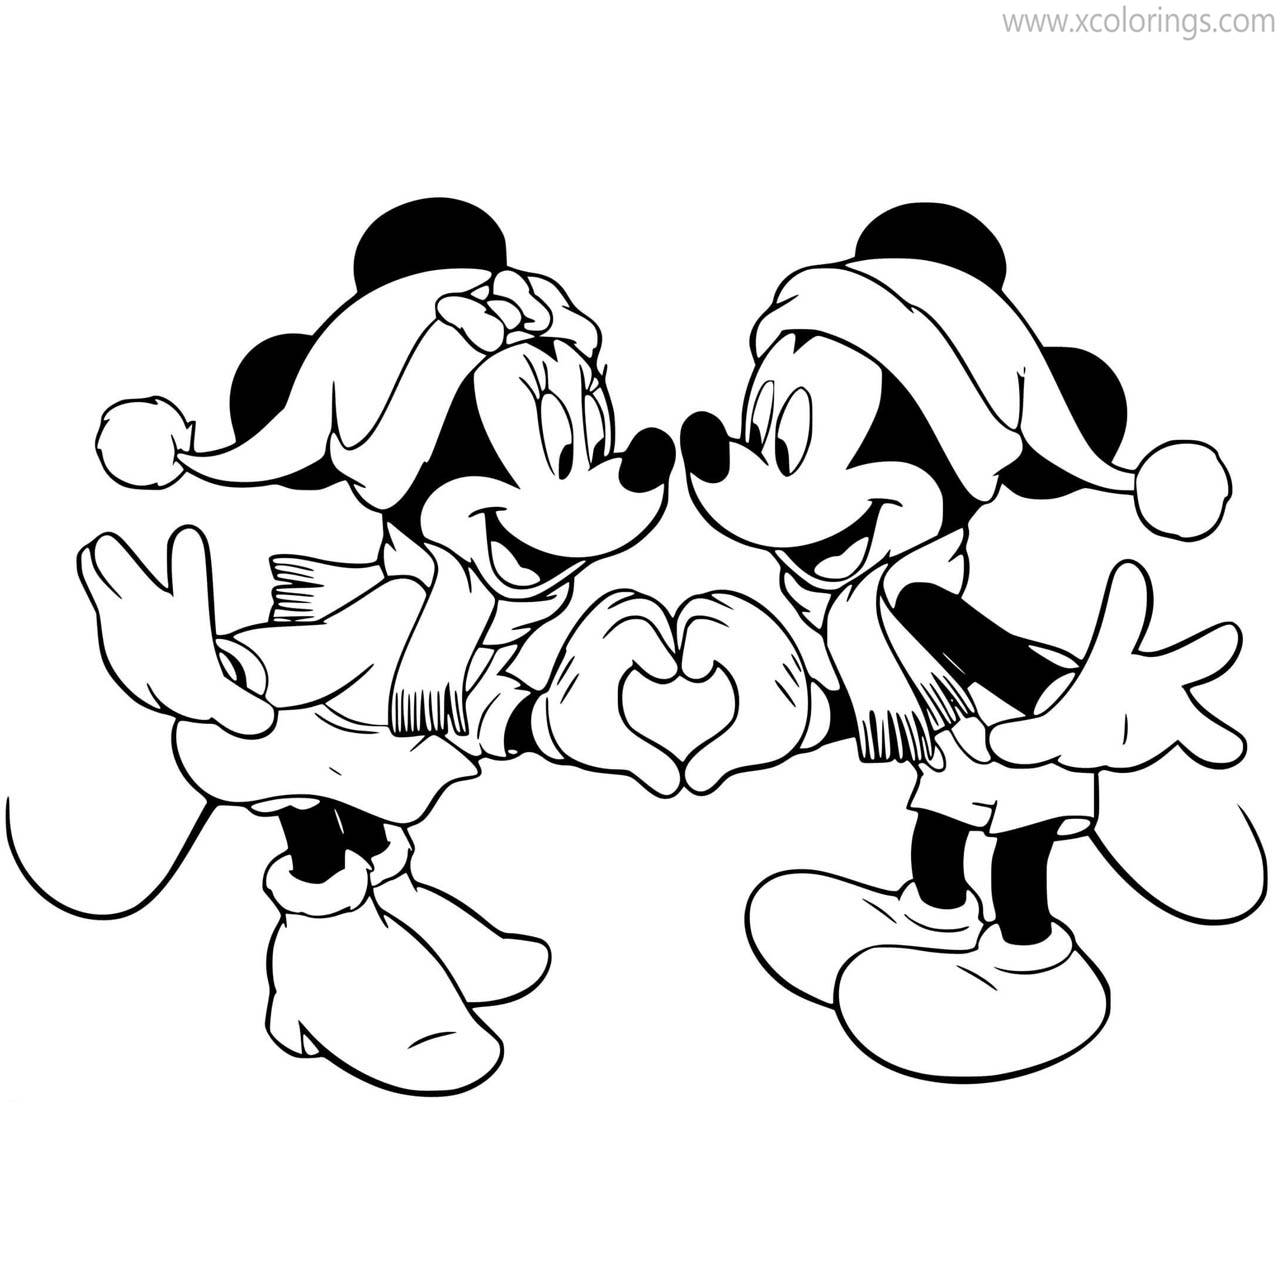 Free Mickey and Minnie Christmas Coloring Pages Forming A Heart printable